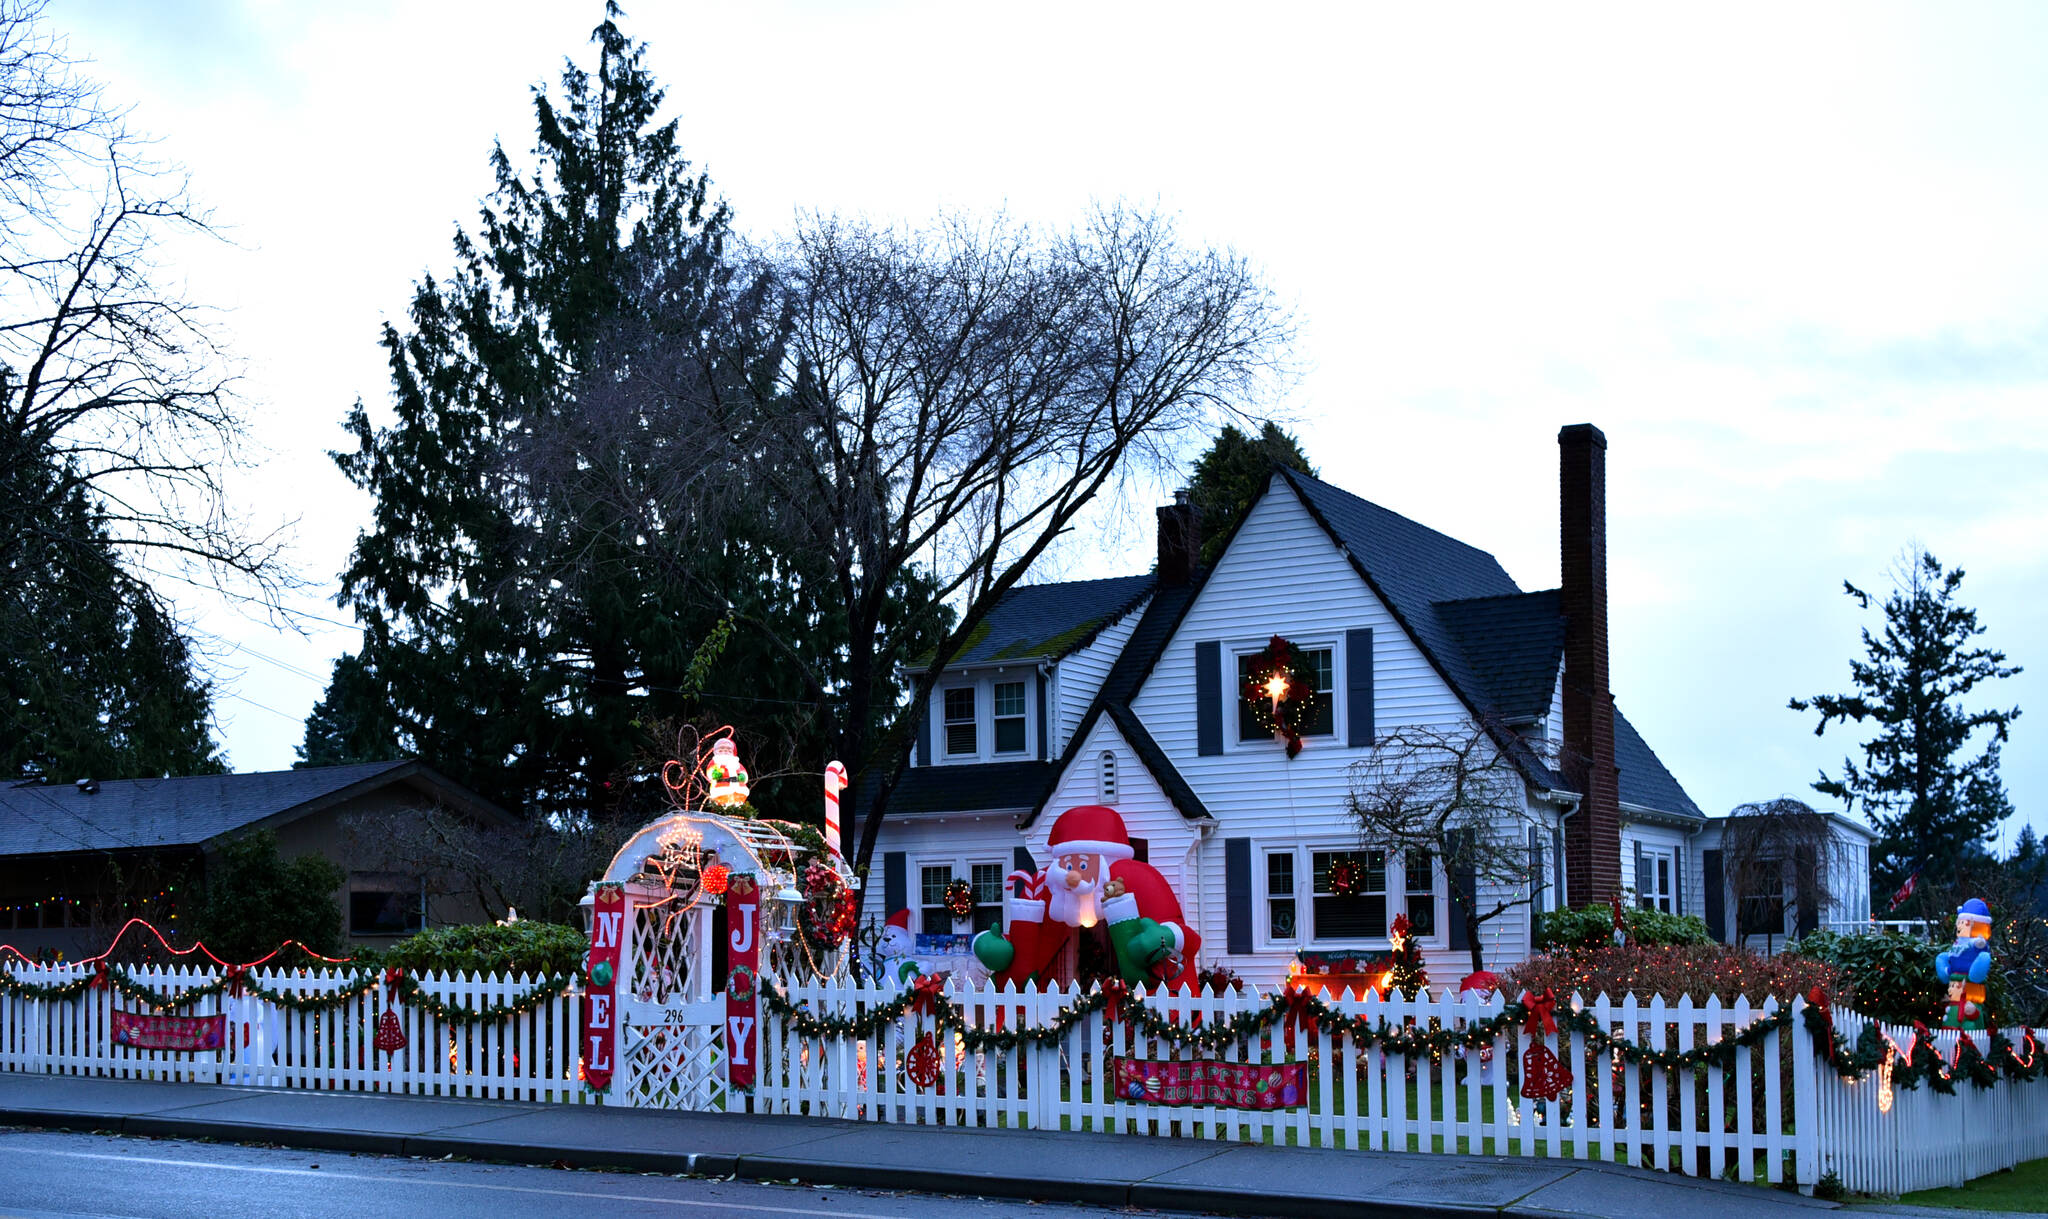 The Christmas display on Ferncliff Avenue from across the road has been a Bainbridge Island holiday attraction for 52 years.